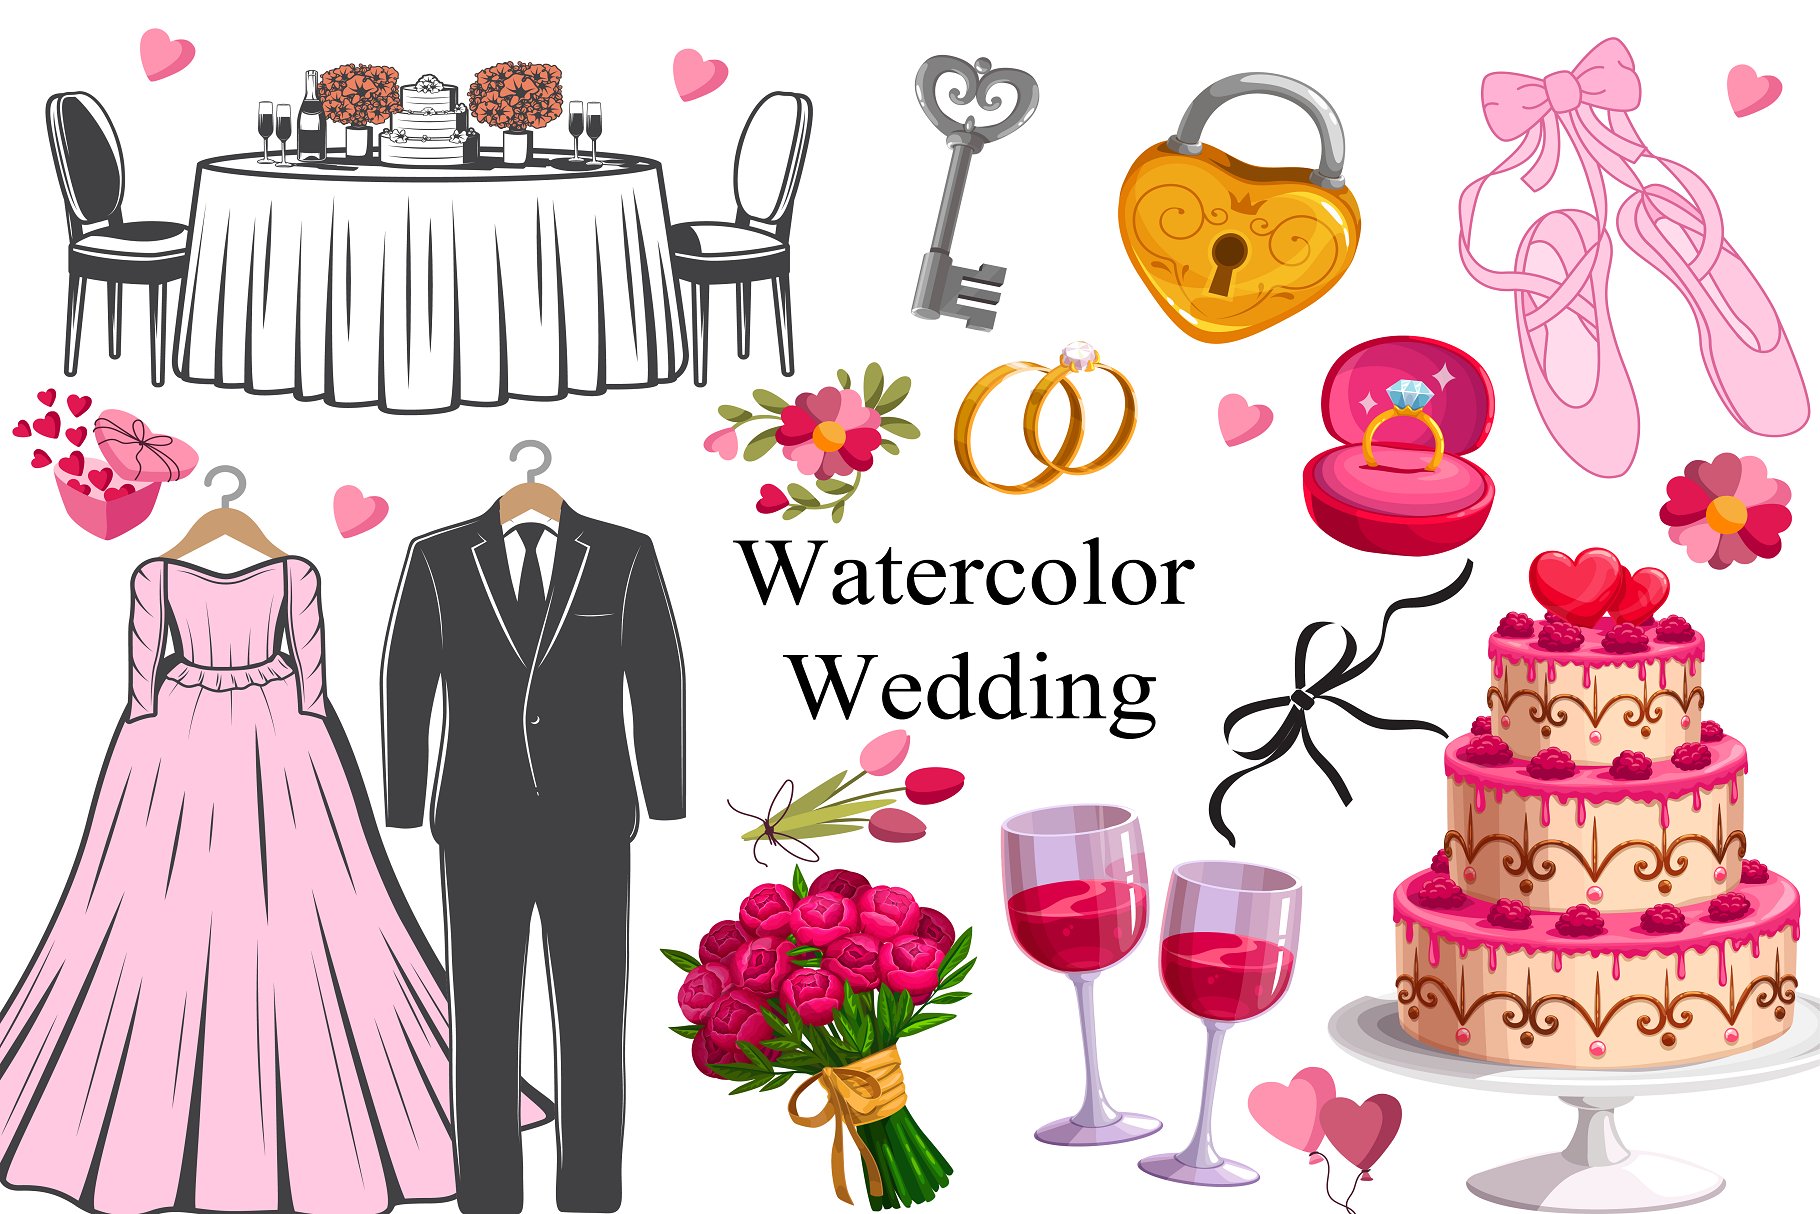 Wedding Day Clipart cover image.